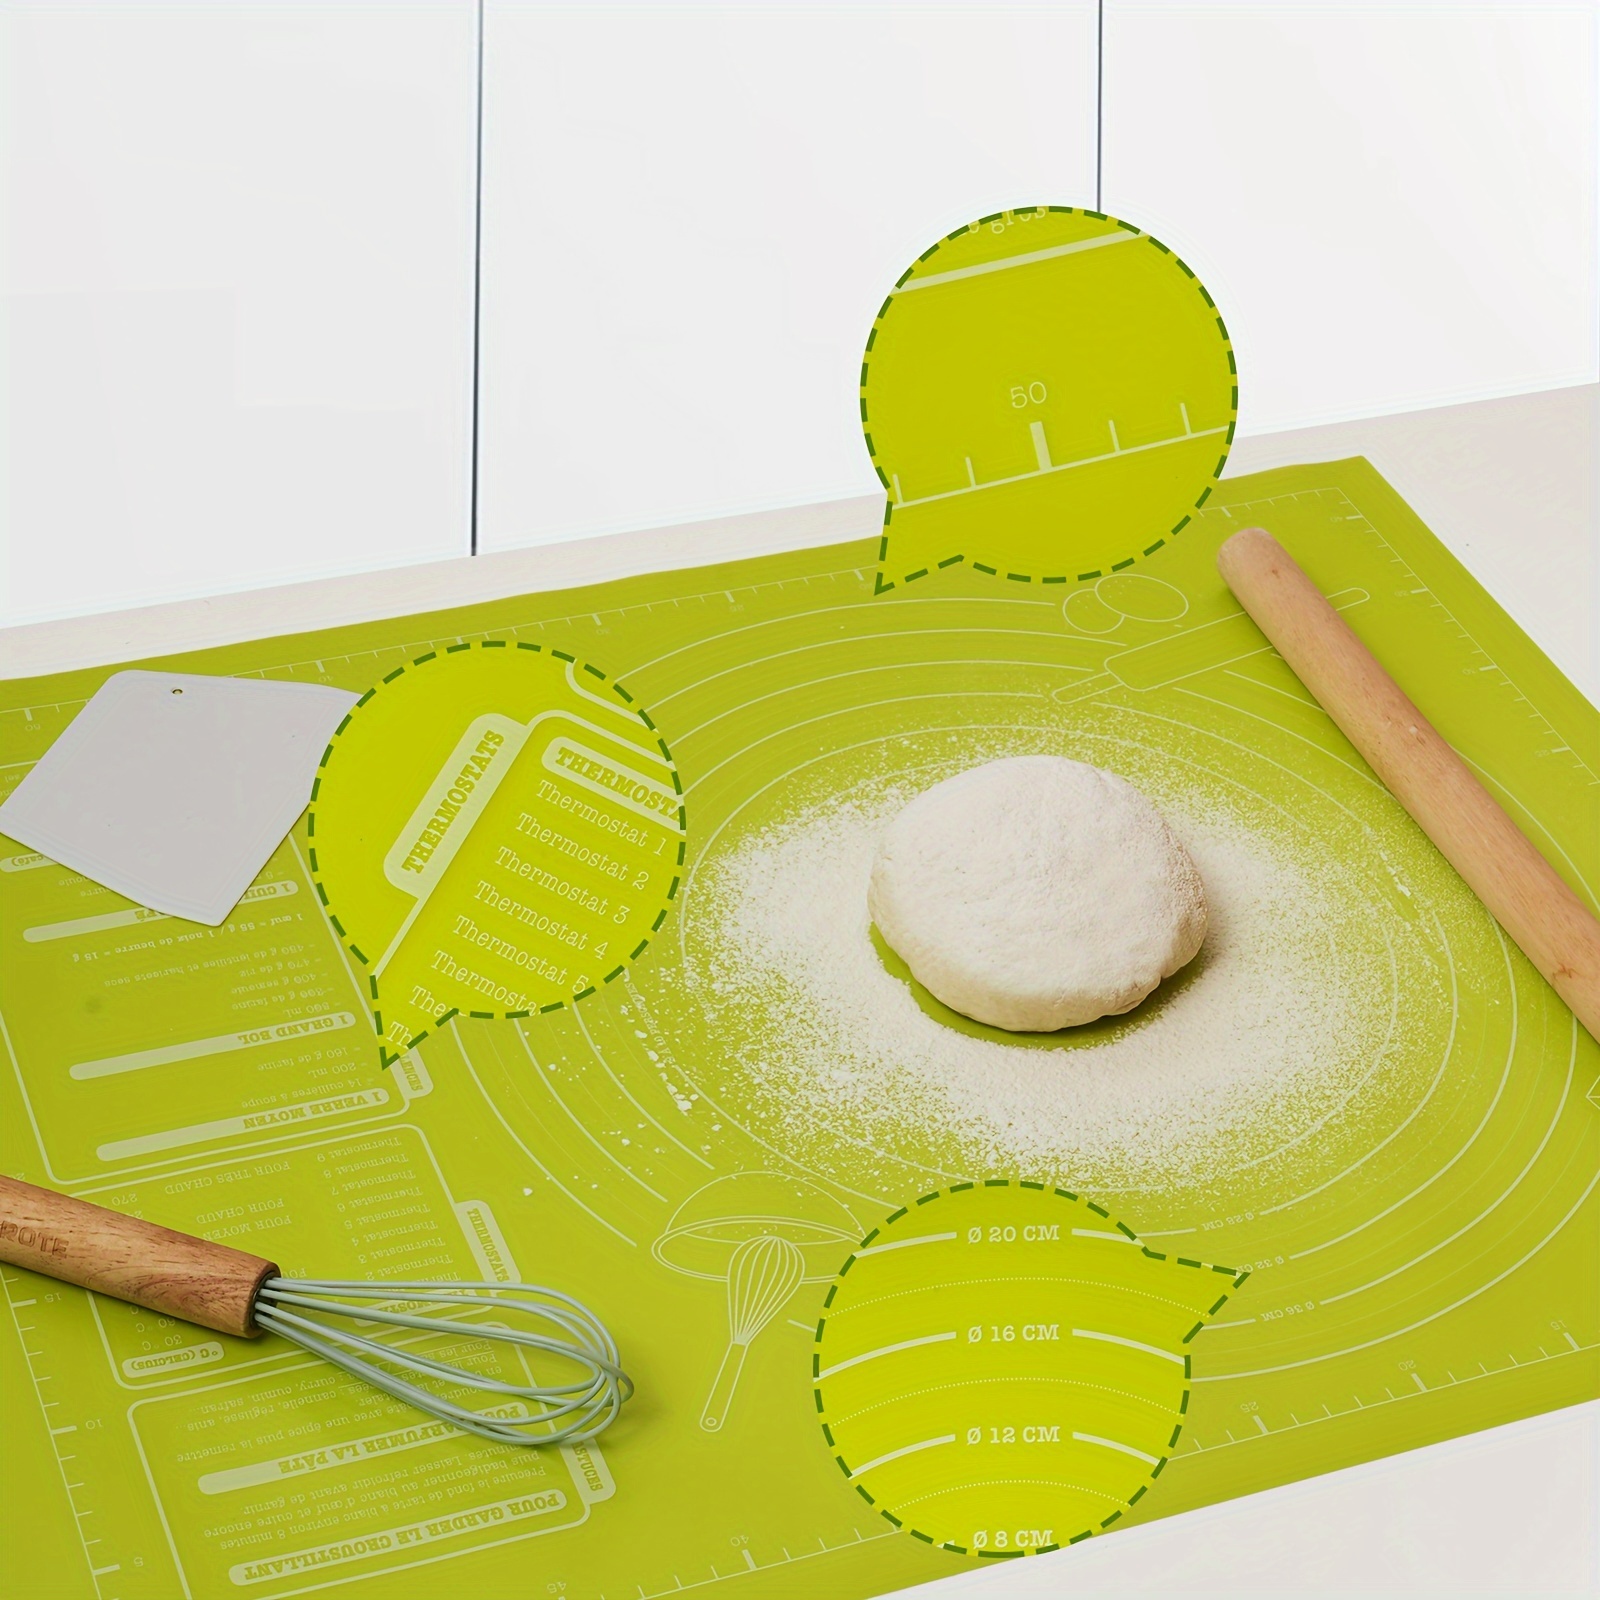 1pc Non-slip Pastry Mat, Silicone Baking Mat, Counter Mat, Oven